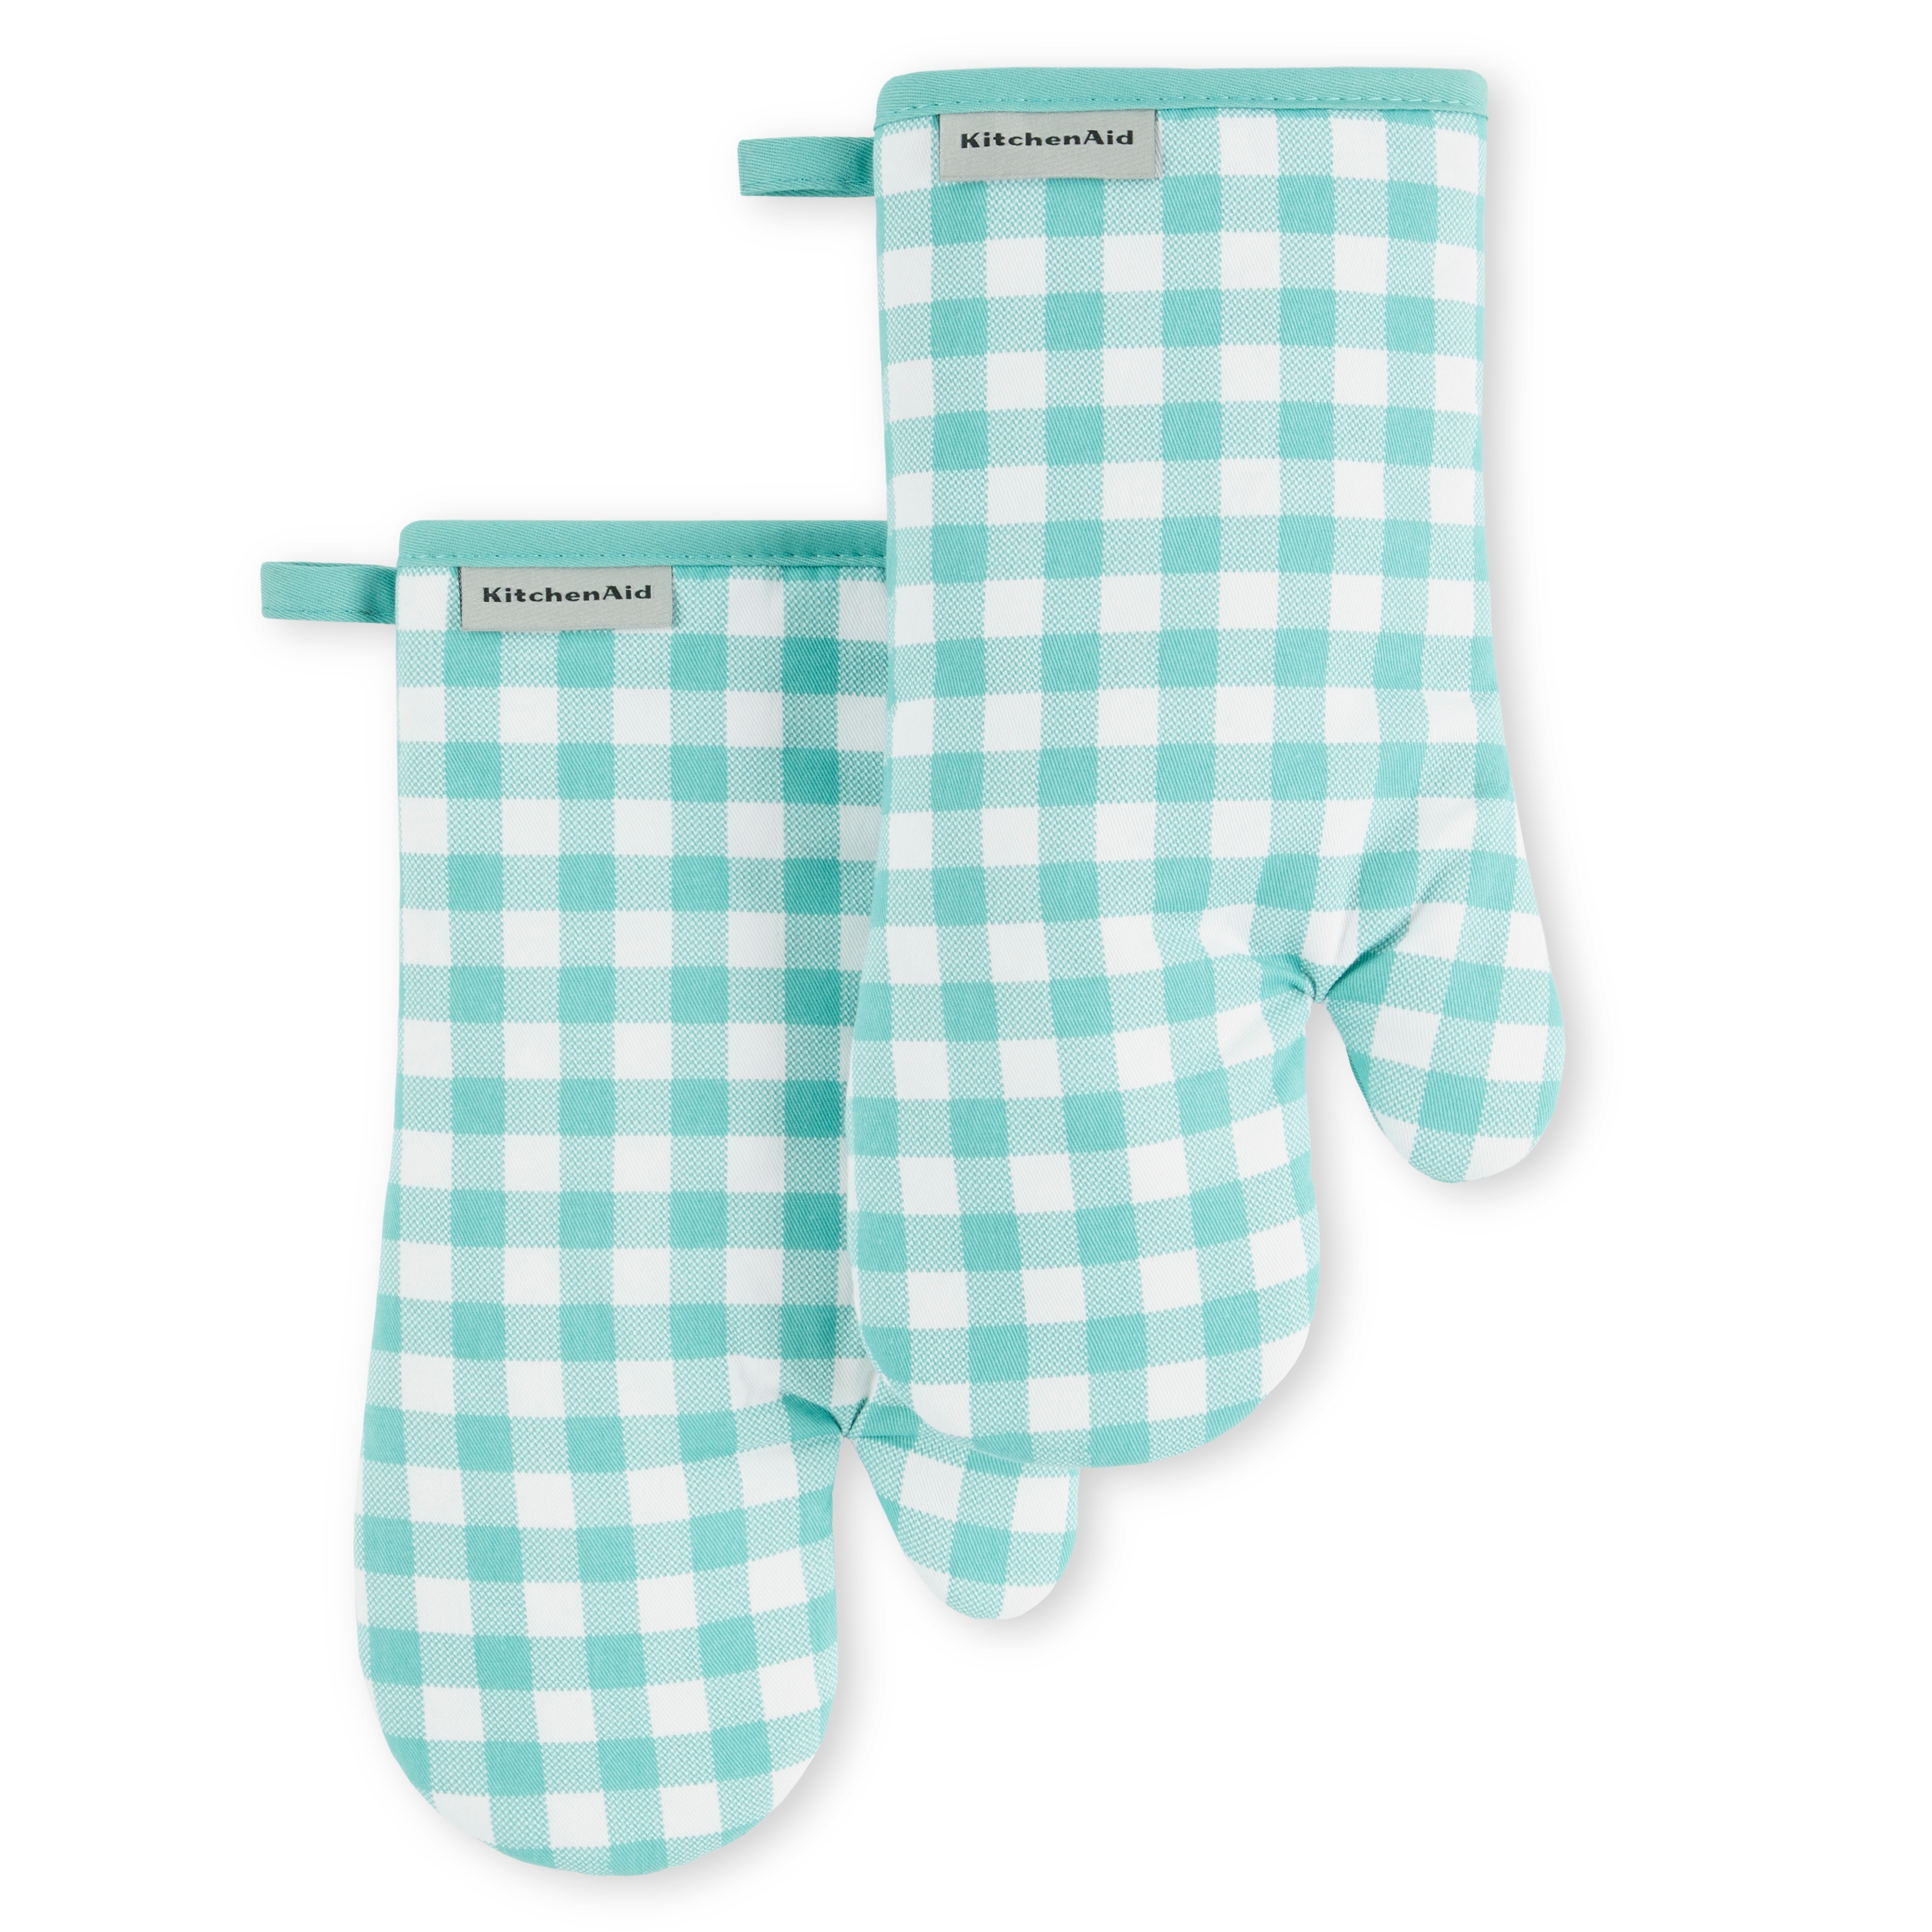 https://ak1.ostkcdn.com/images/products/is/images/direct/e9d24d7e96cb2d47010d2c8fe60fb91c3368b13f/KitchenAid-Gingham-Oven-Mitt-2-Pack-Set.jpg